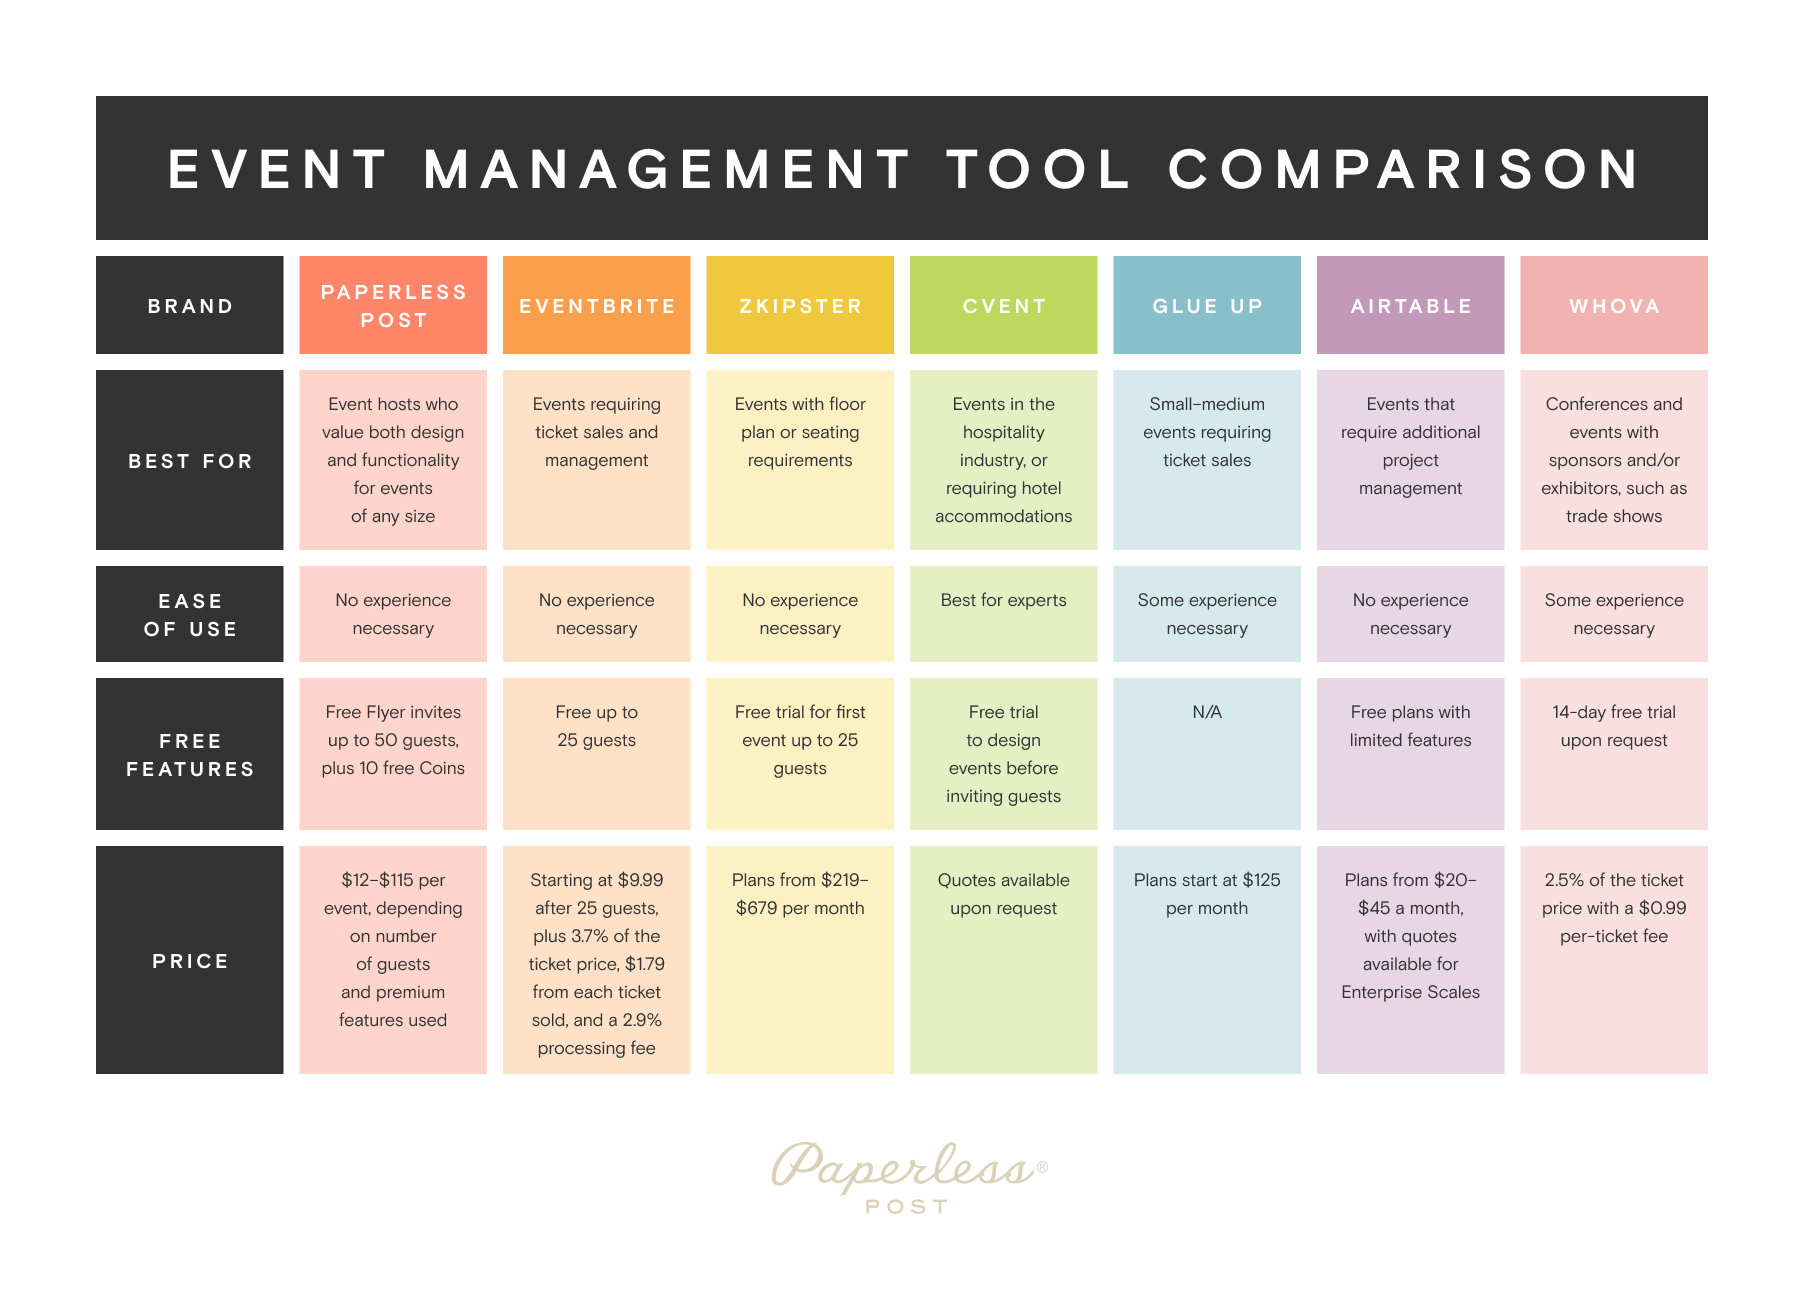 A rainbow-colored chart that neatly sums up the information found in the rest of this blog post about the pros, cons, features, highlights, and prices of various online event management tools.